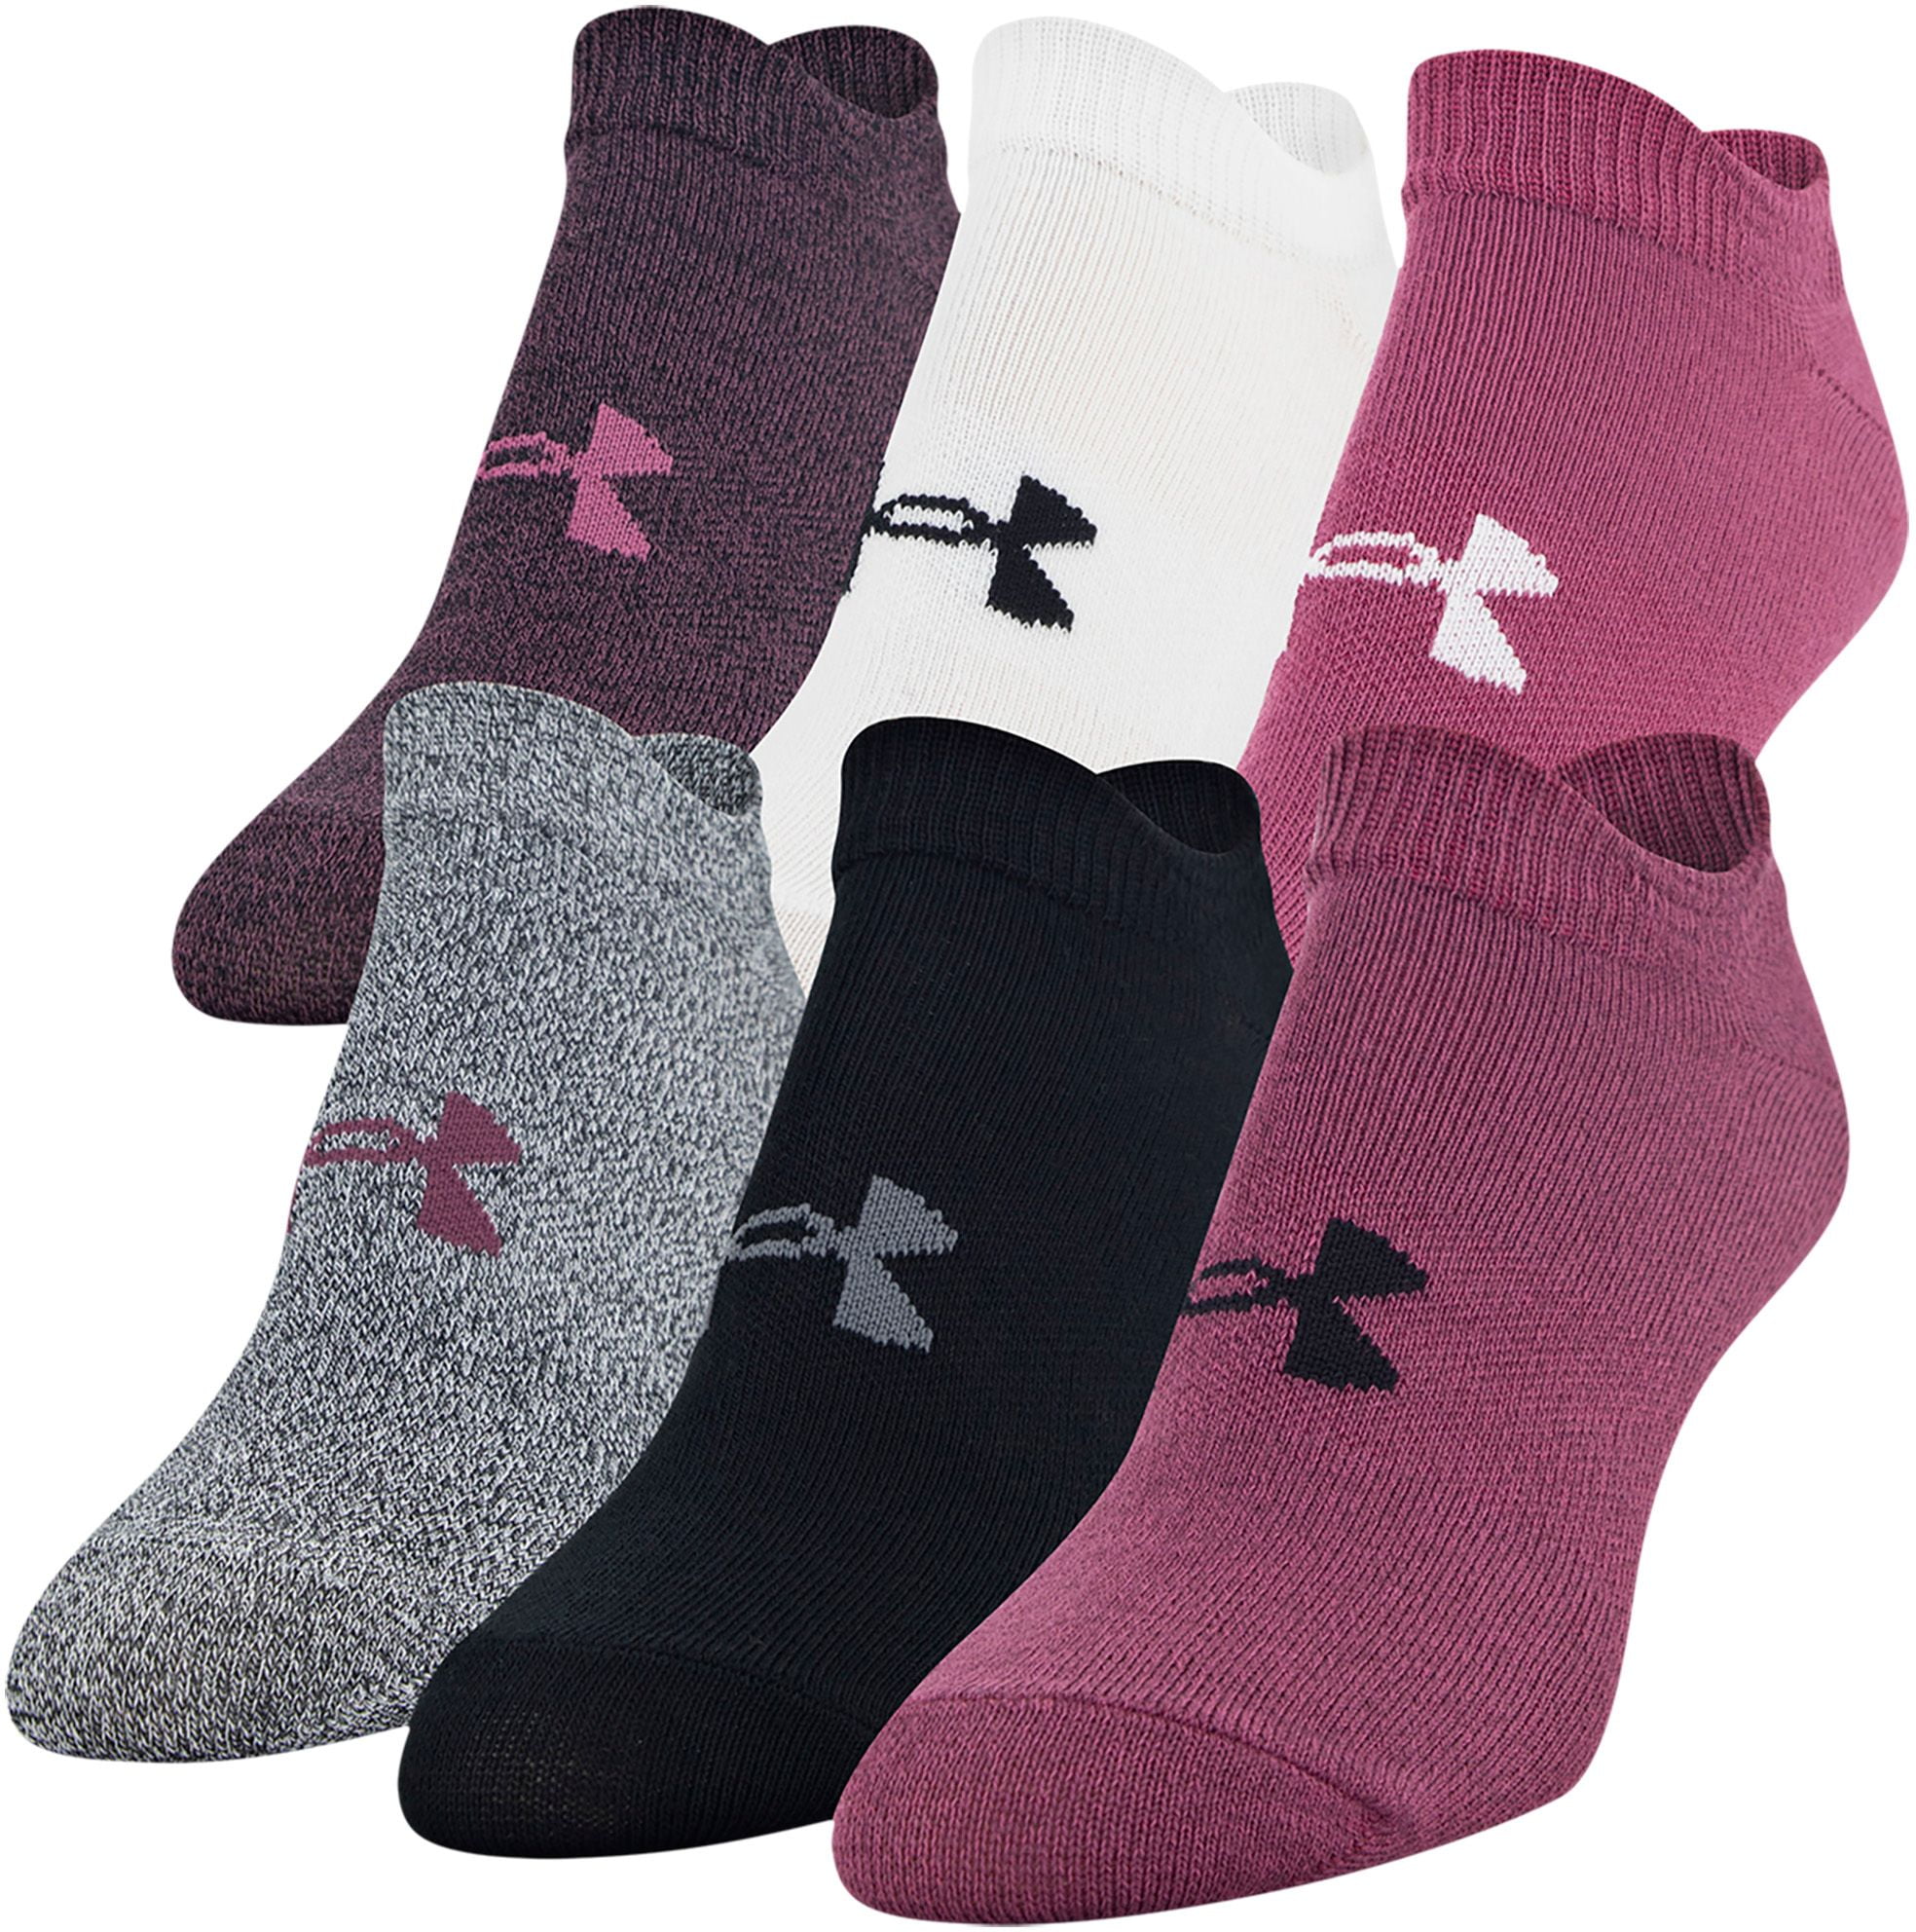 Assorted Colors 6 Pairs Under Armour Women's Essential No-Show Liner Socks 